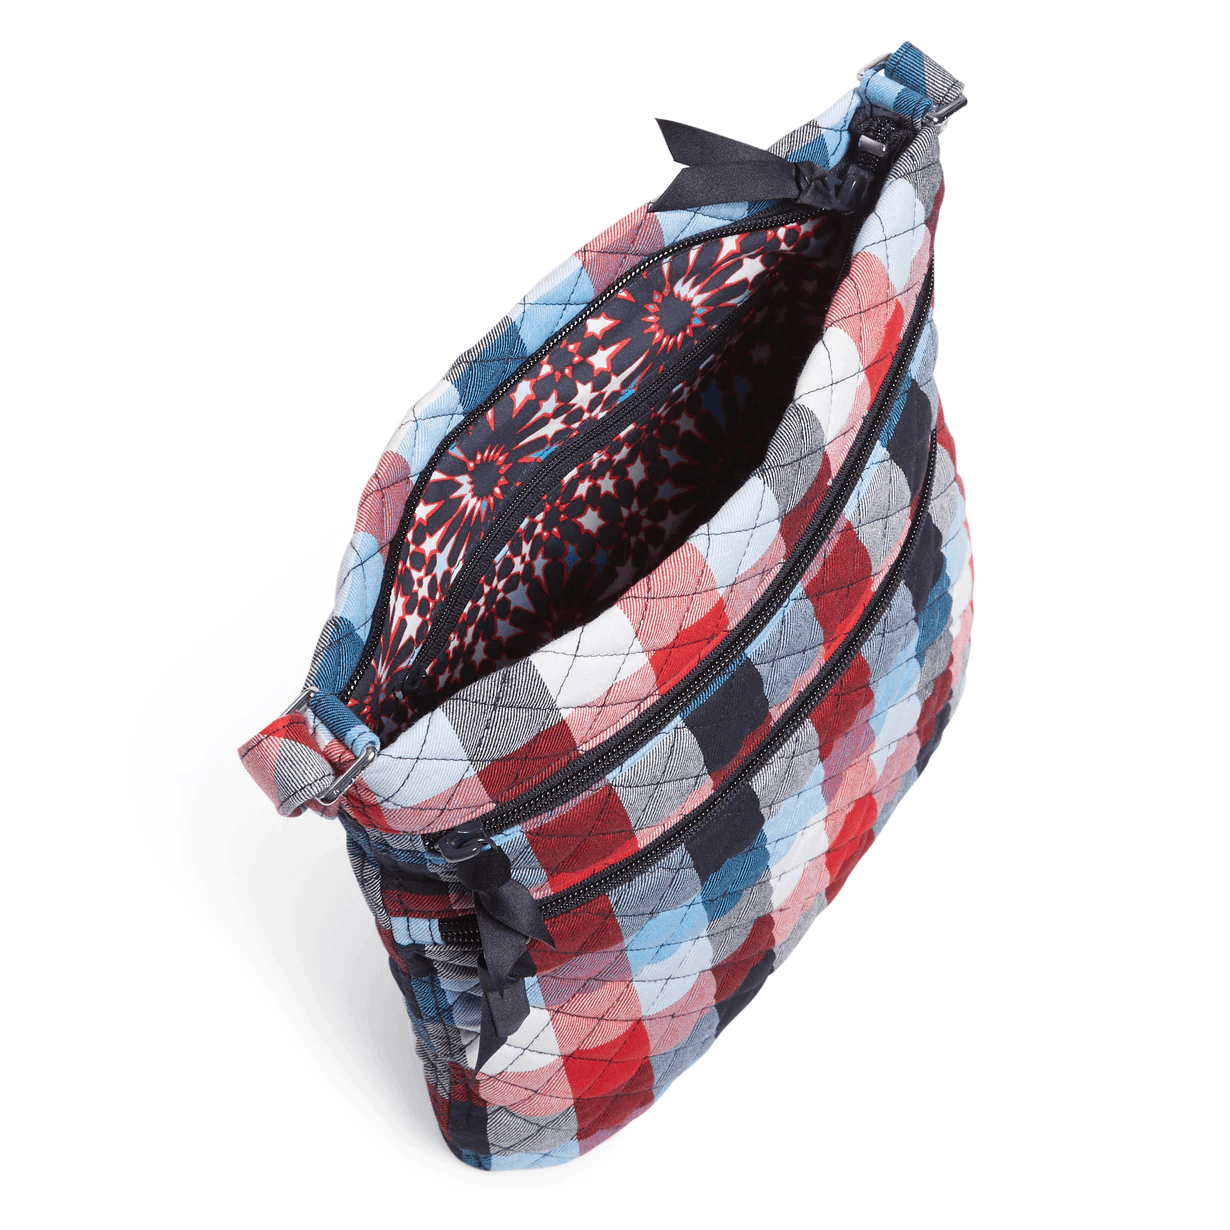 Triple Zip Hipster Crossbody Bag Patriotic Plaid - Sunshine and Grace Gifts